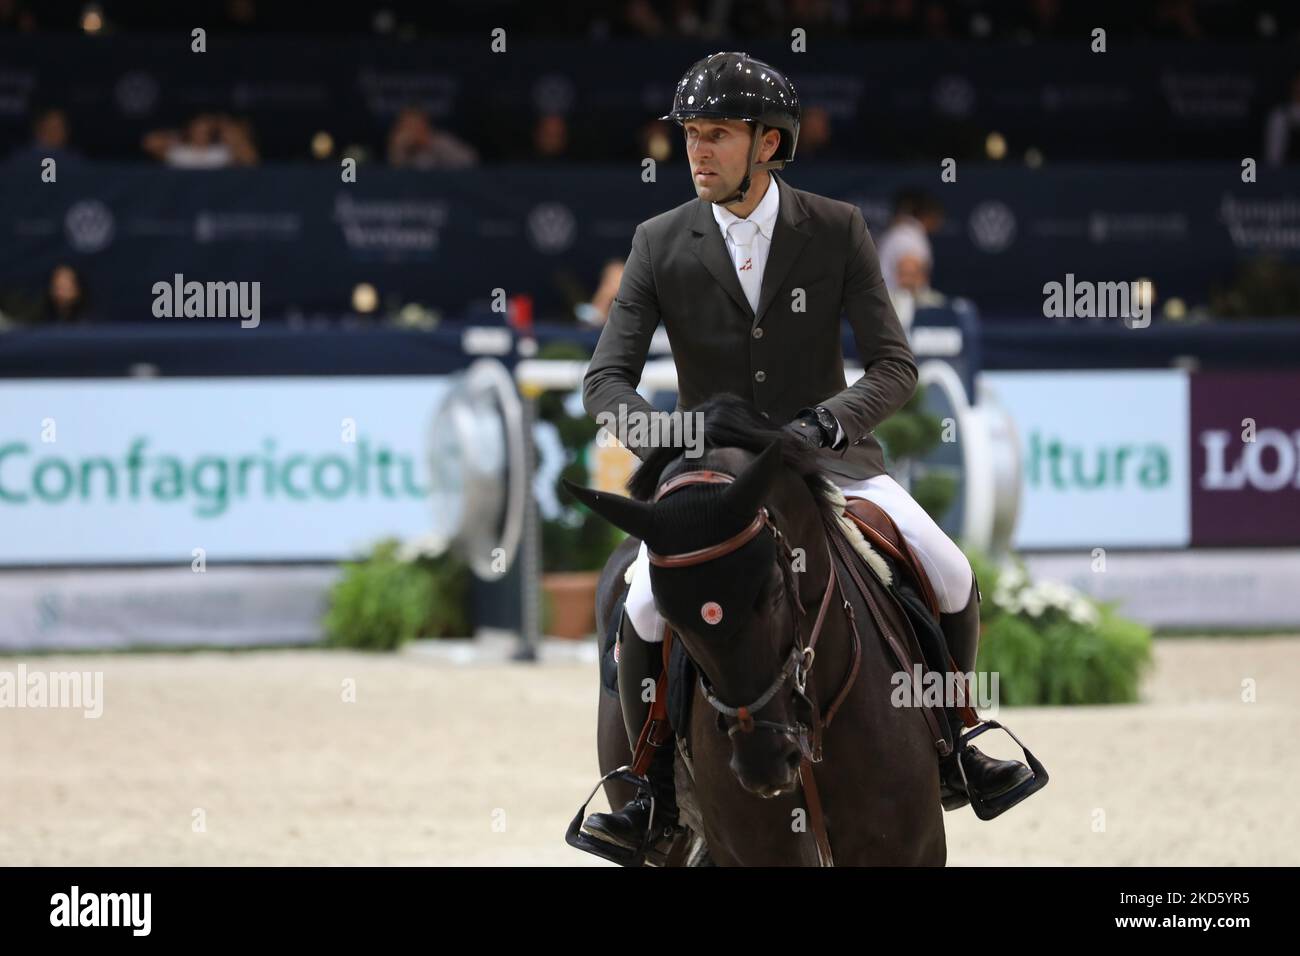 Verona, Italy. 04th Nov, 2022. Simon DELESTRE of France riding Dexter Fontenis Z wins the Kask competition as part of the FEI Jumping World Cup 2022 at the Pala Volkswagen on November 4th 2022 in Verona, Italy Credit: Mickael Chavet/Alamy Live News Stock Photo